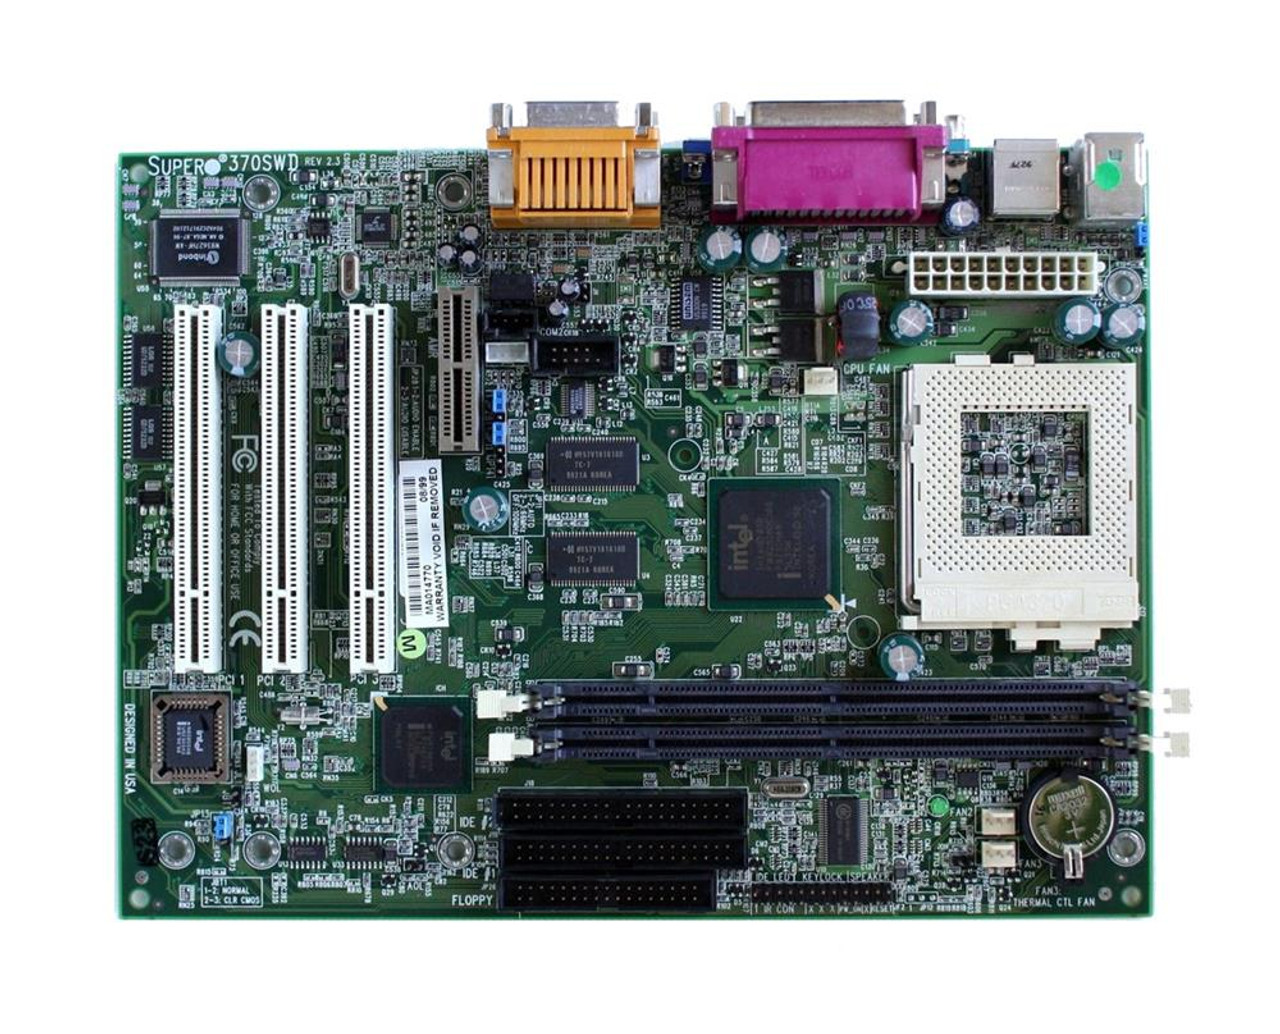 370SWD SuperMicro Socket 370 Intel i810 Chipset Micro-ATX System Board (Motherboard) (Refurbished)